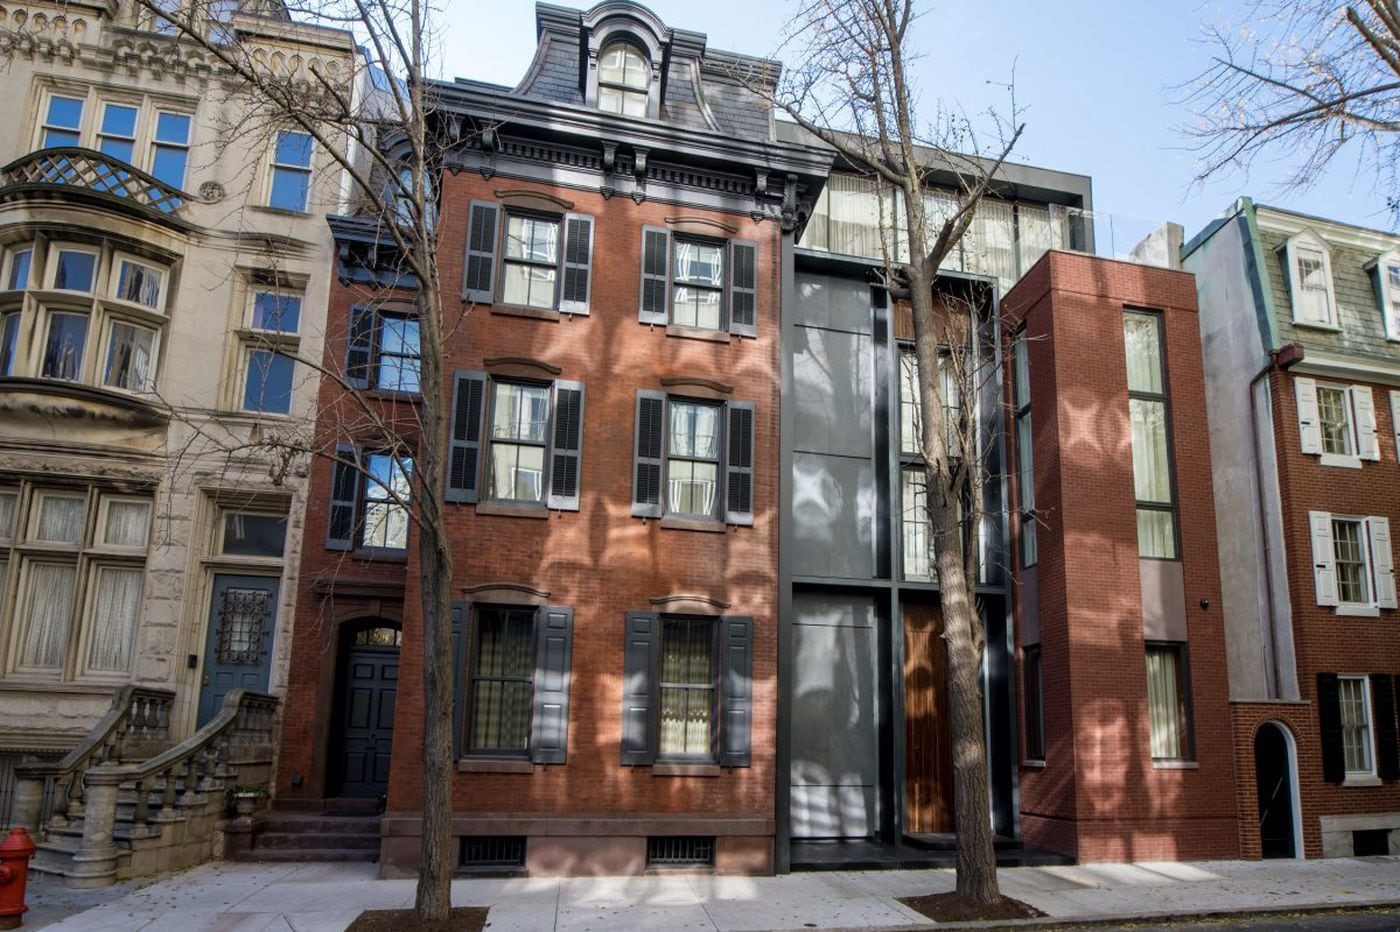 Bart Blatstein S Mansion Brings The Gilded Age Back To Rittenhouse